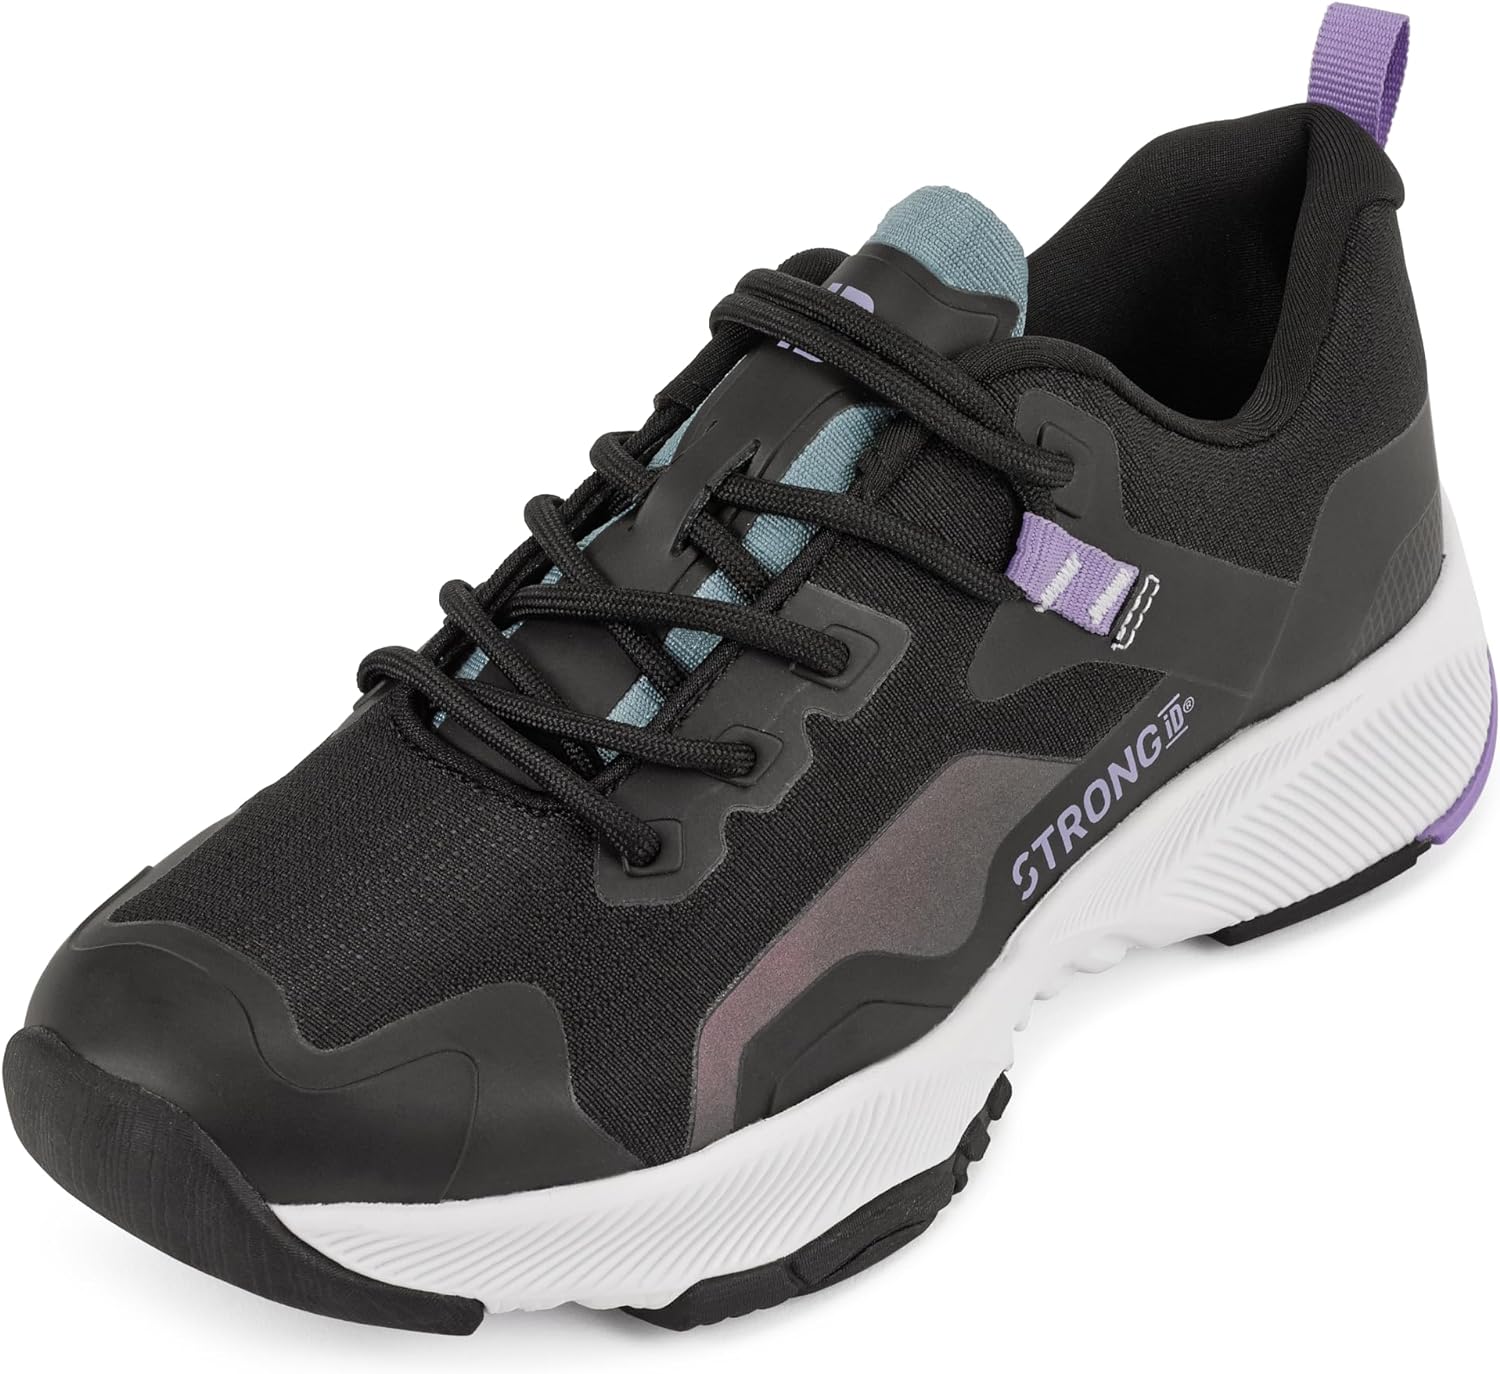 Strong Id Low-Top Exercise Shoes For Women, Athletic Sneakers